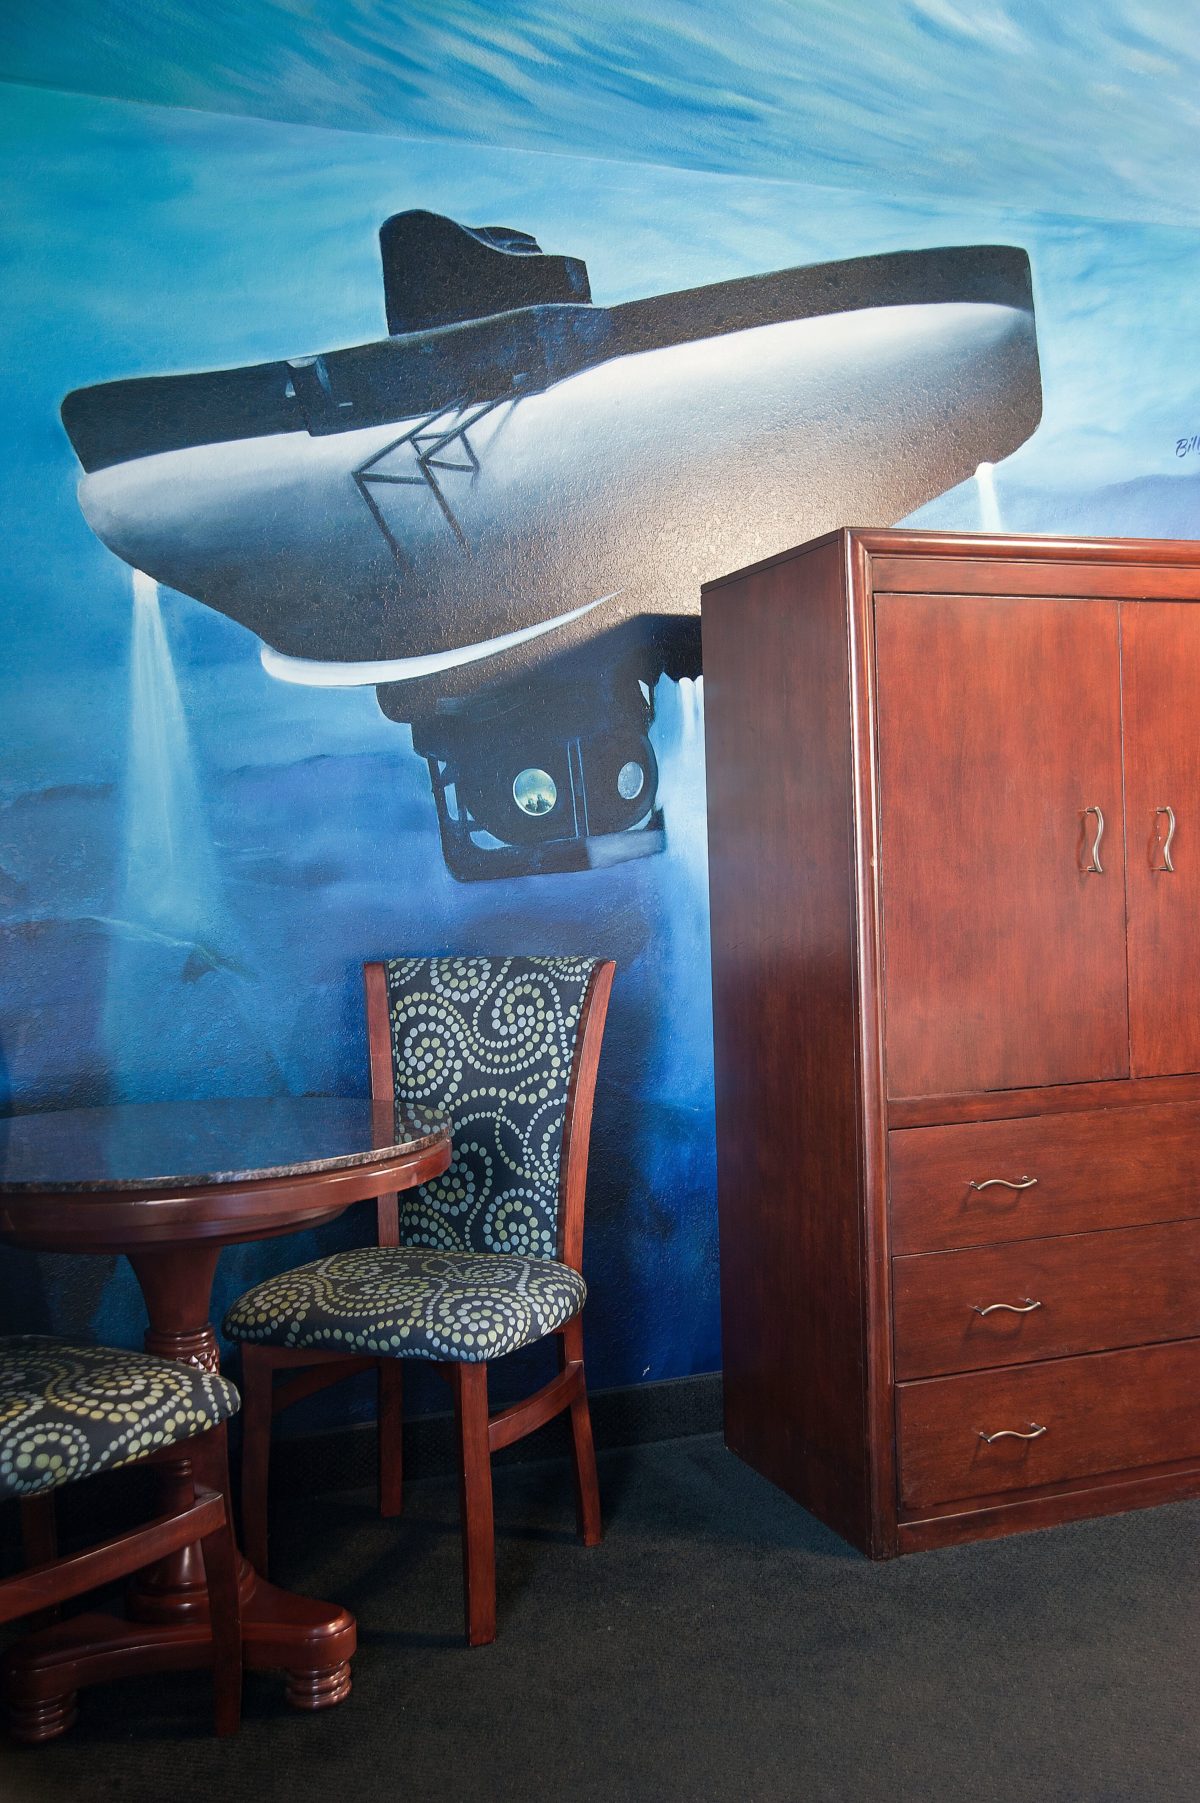 20,000 Leagues Under the Sea Suite at The Stone Castle Hotel and Conference Center, Branson, MO